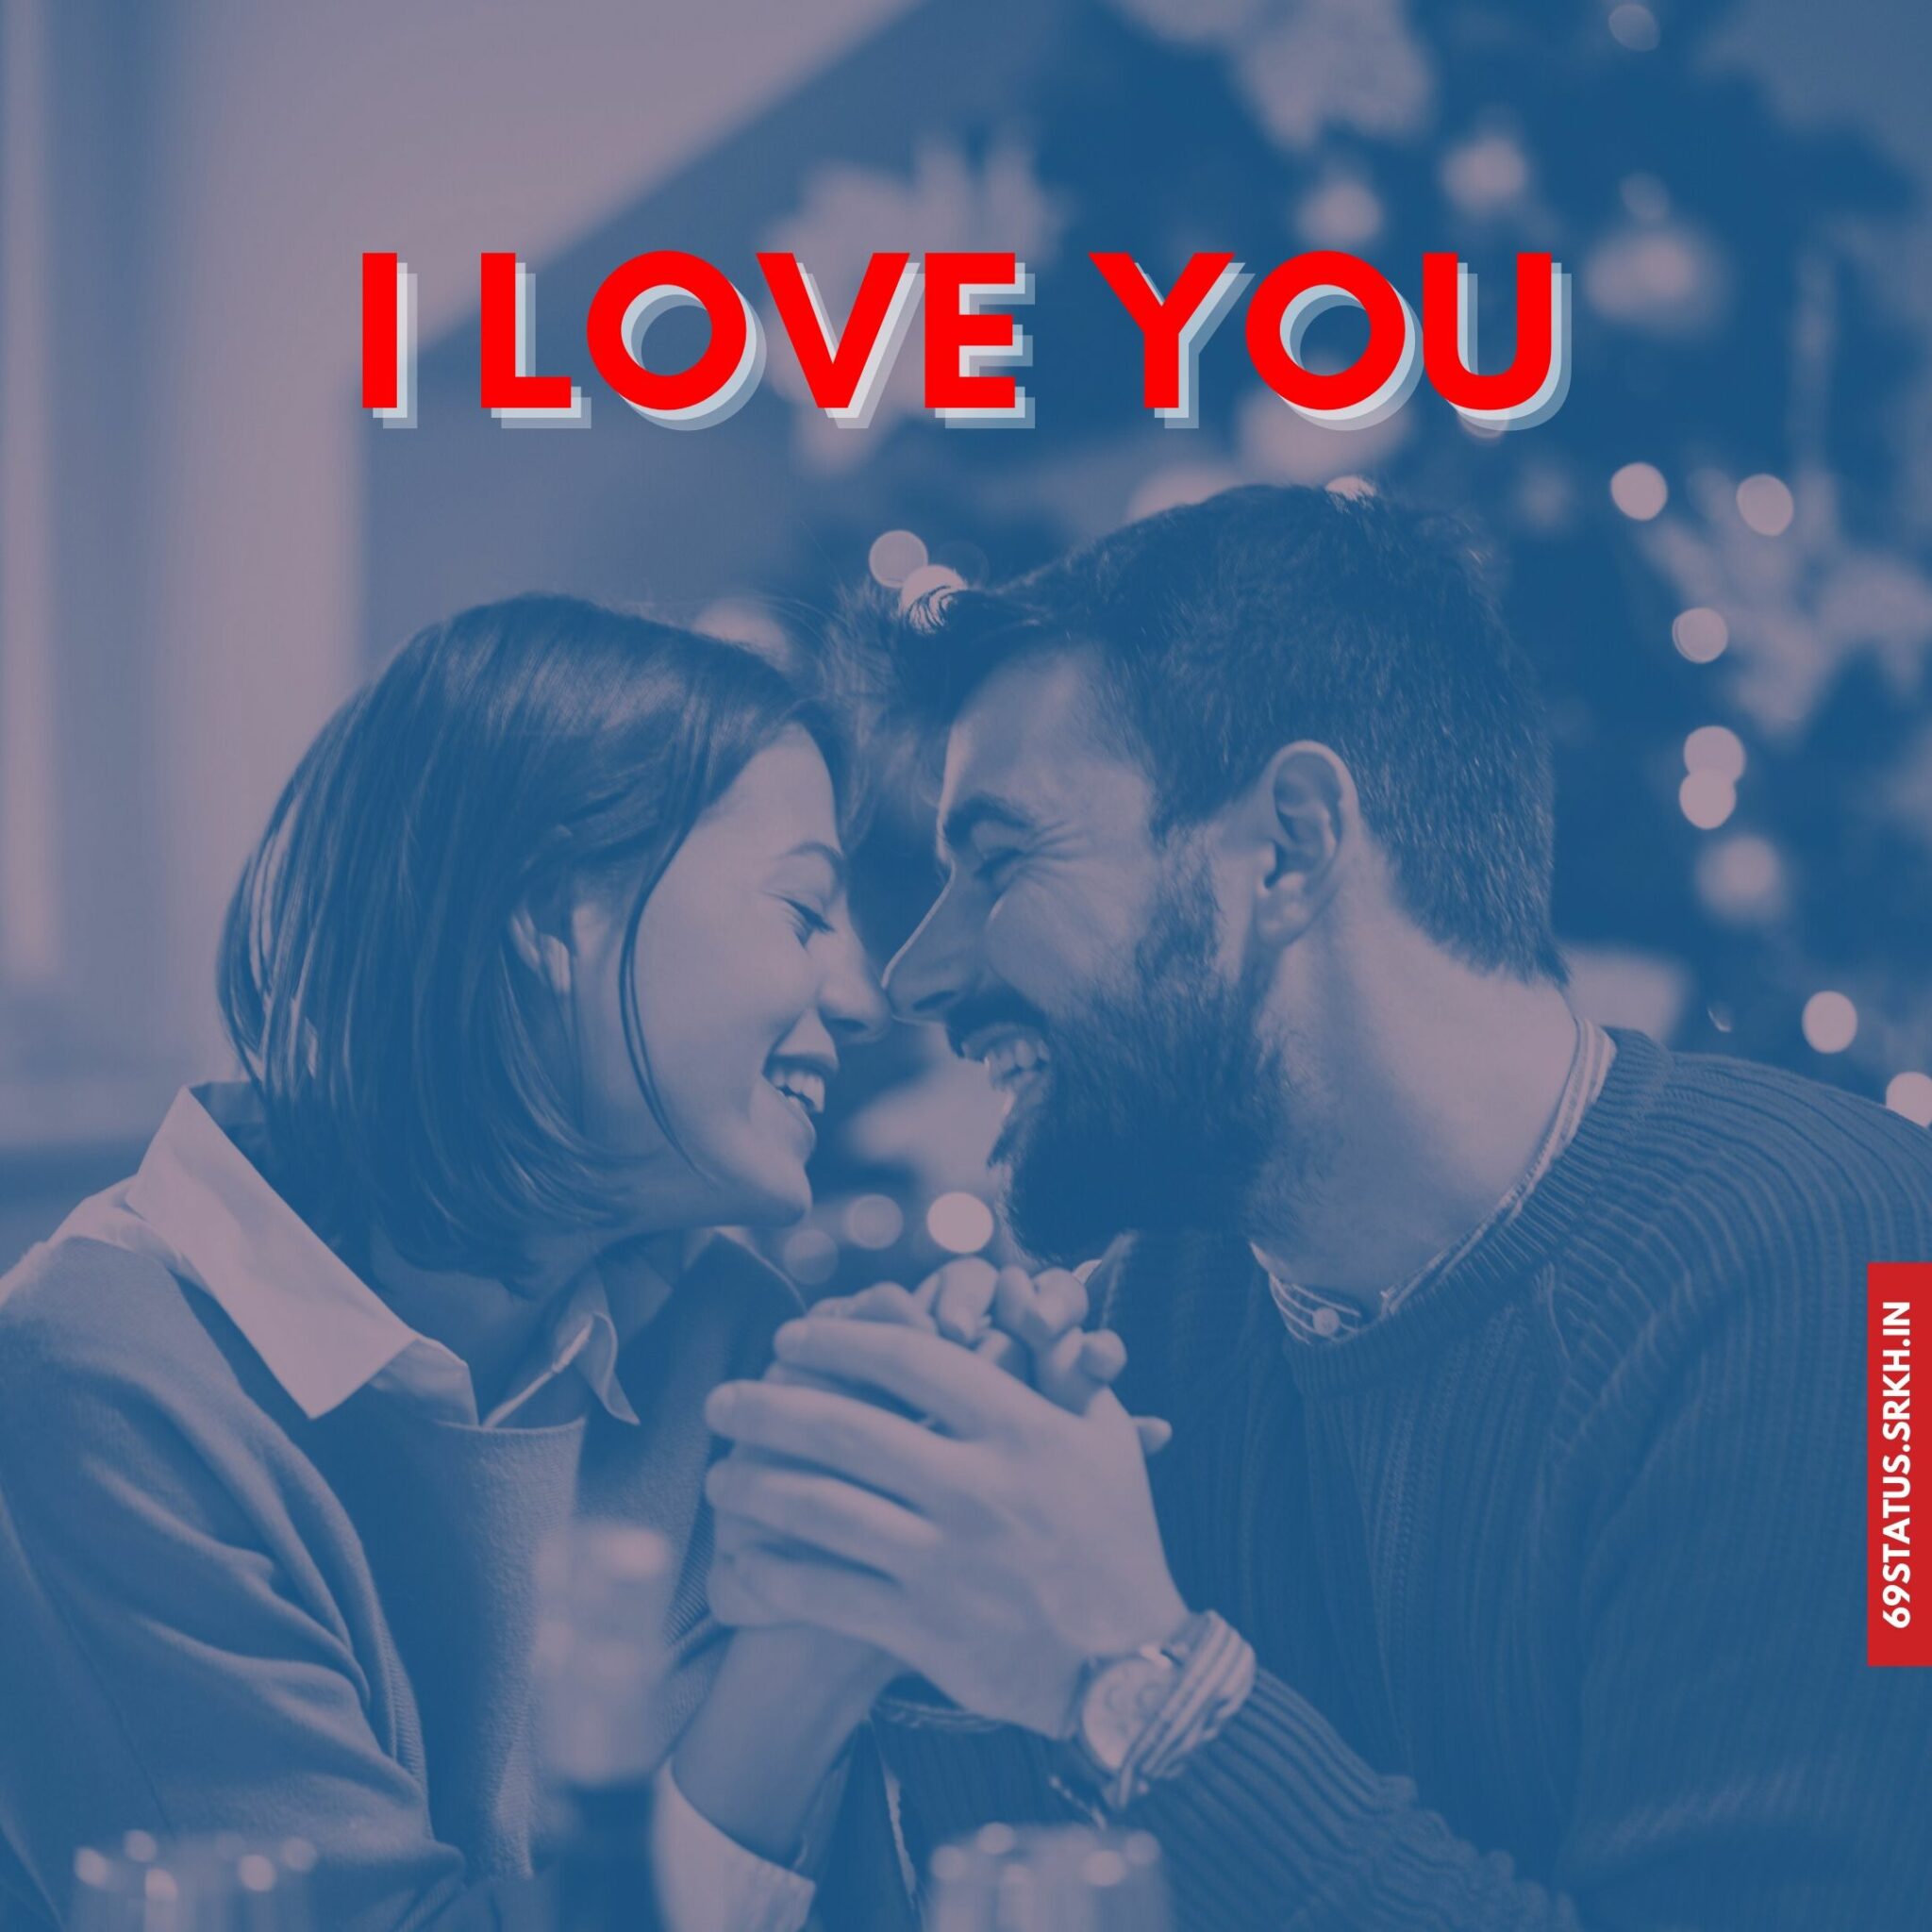 I Love You images free download